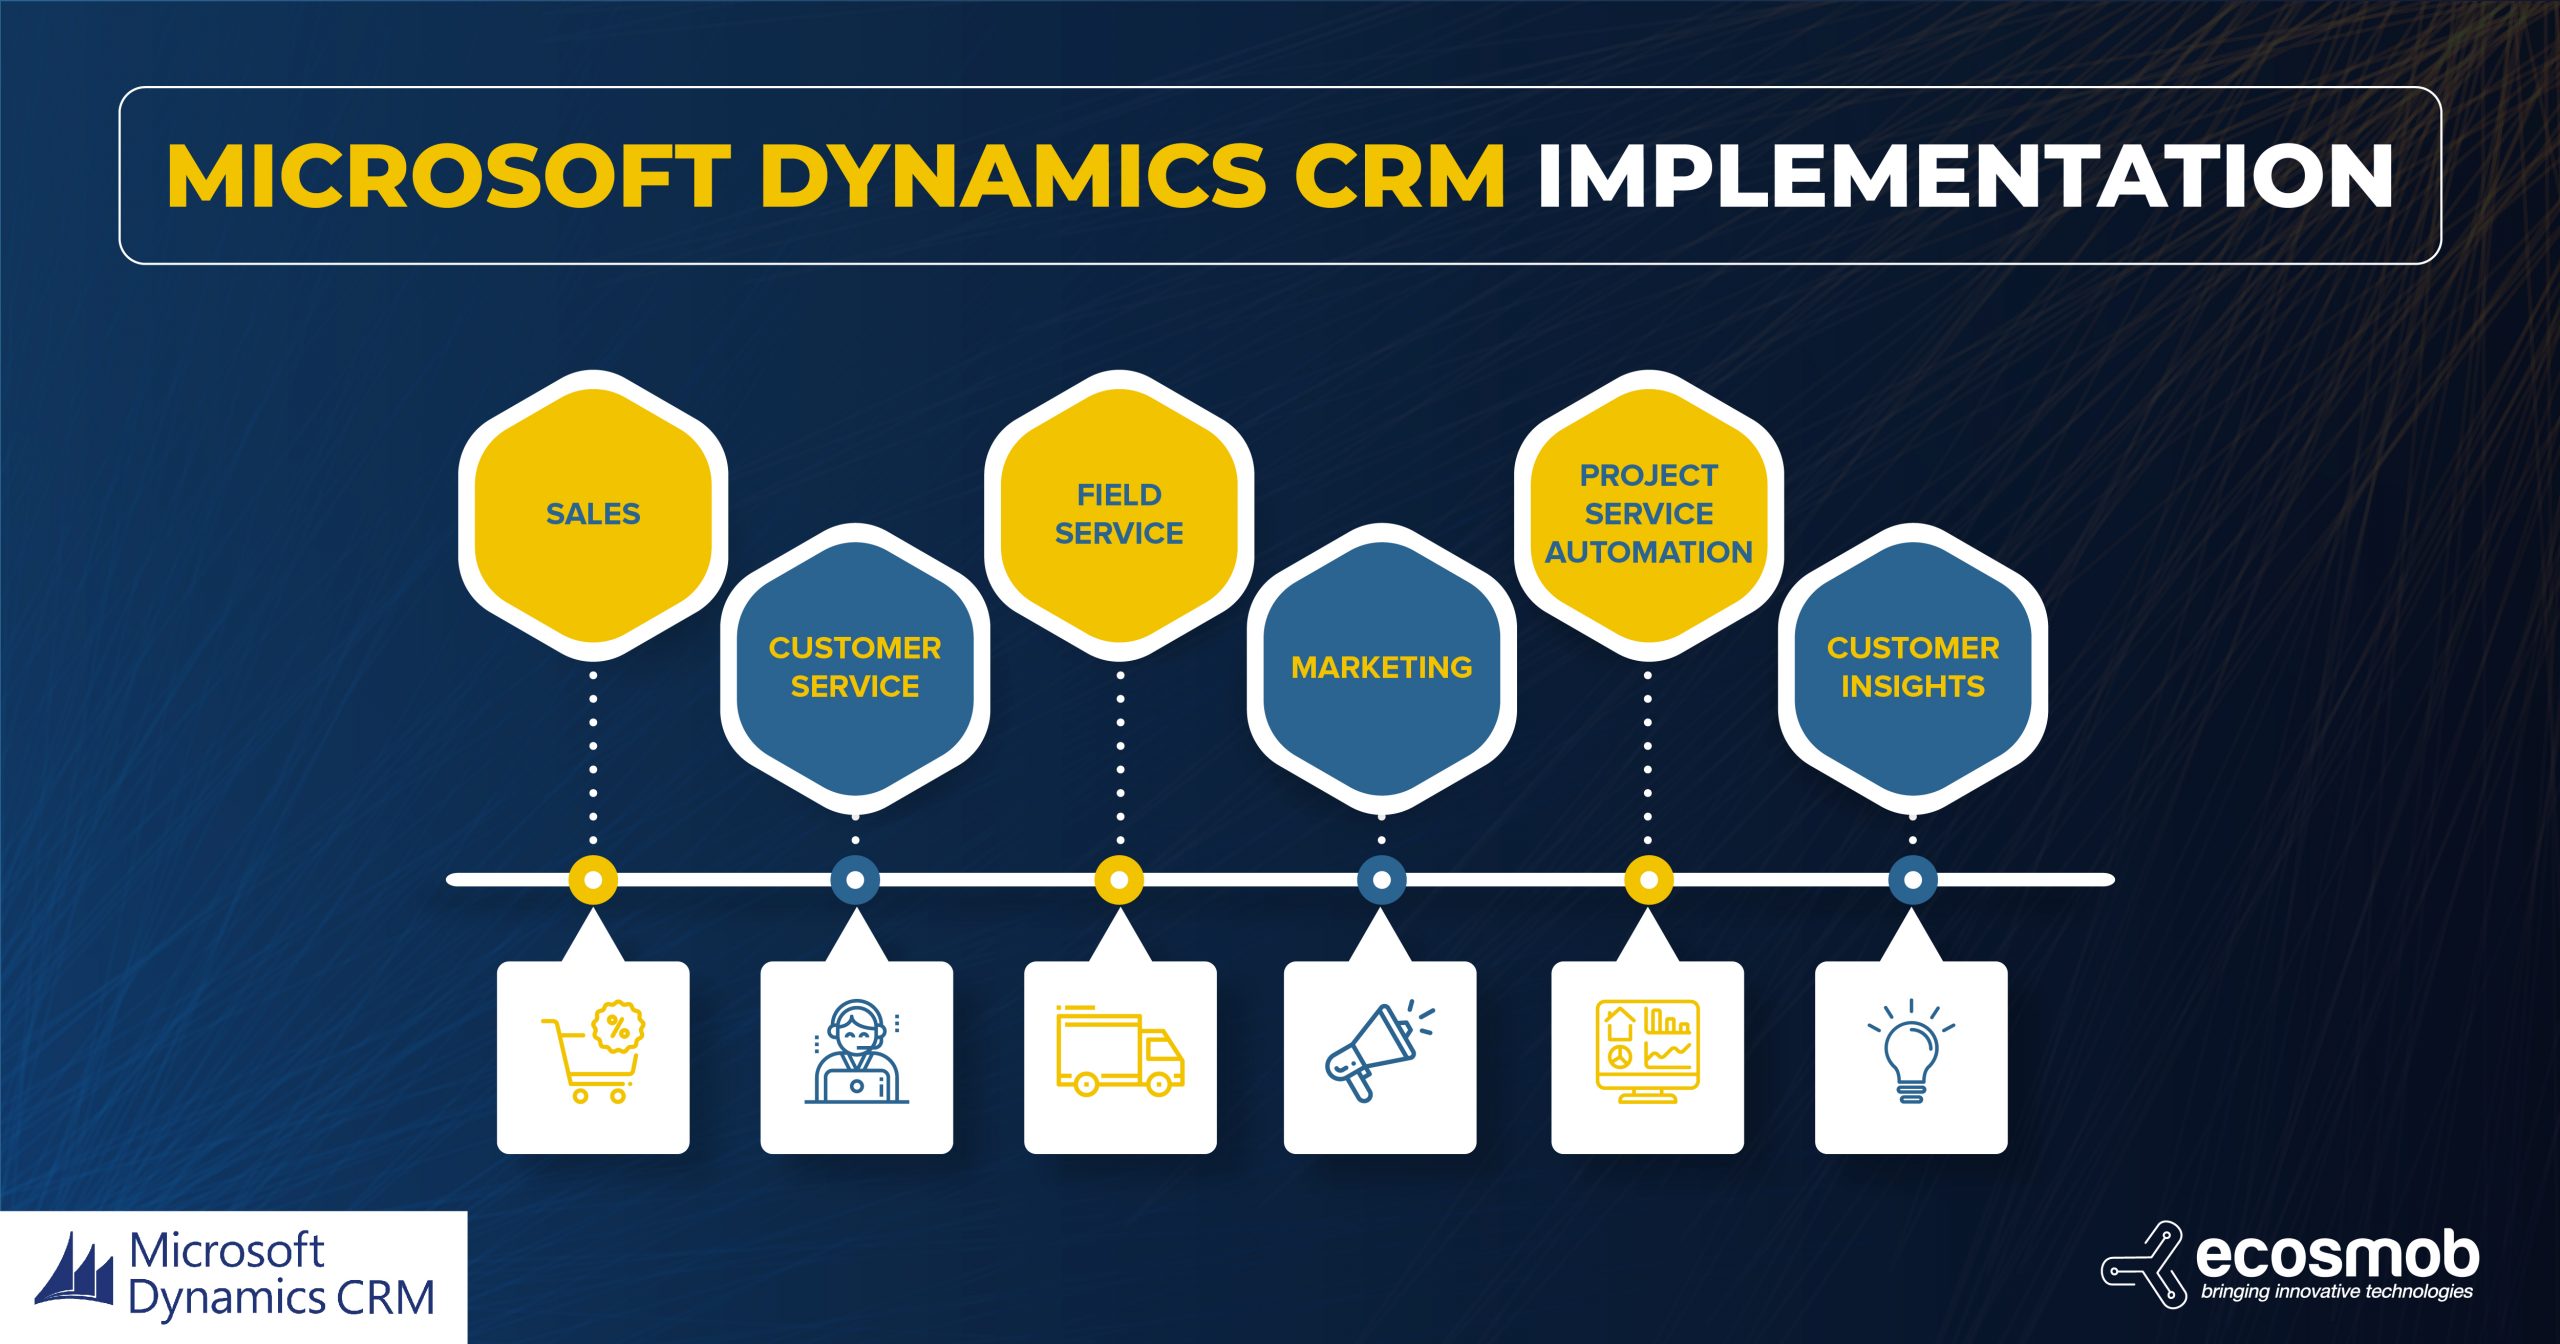 Know How Microsoft Dynamics Crm Implementation Works